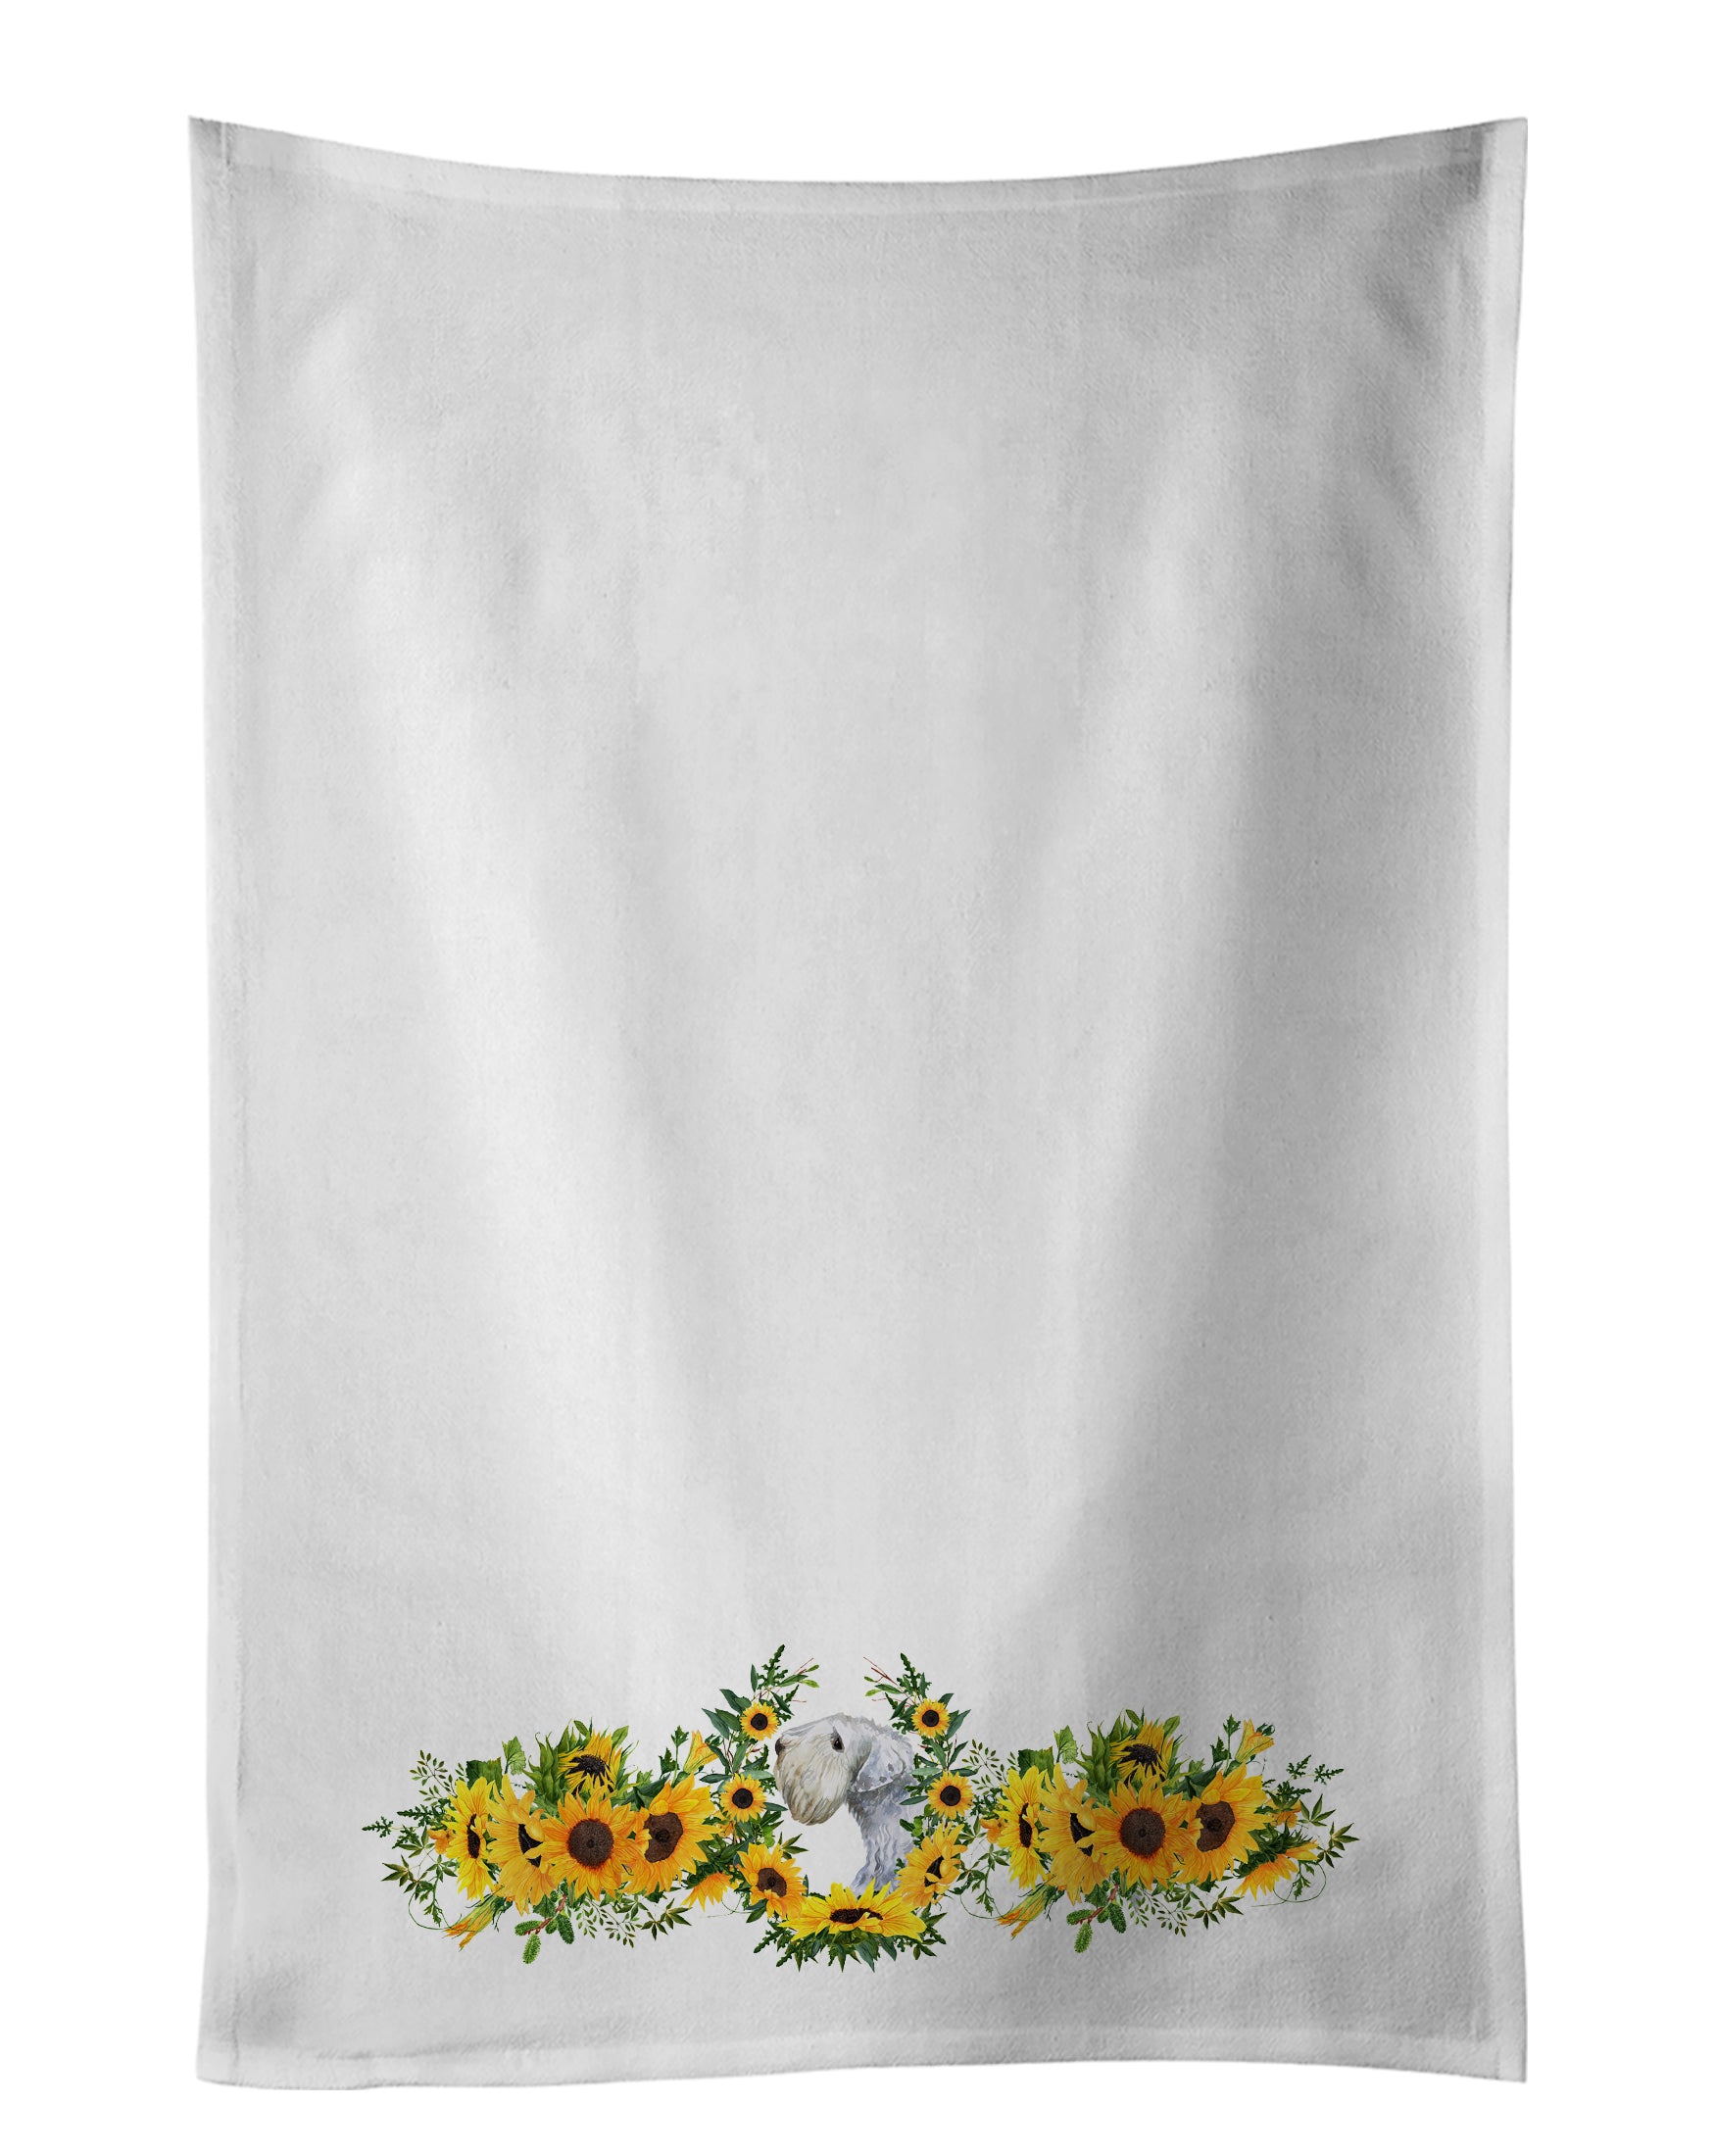 Buy this Sealyham Terrier in Sunflowers White Kitchen Towel Set of 2